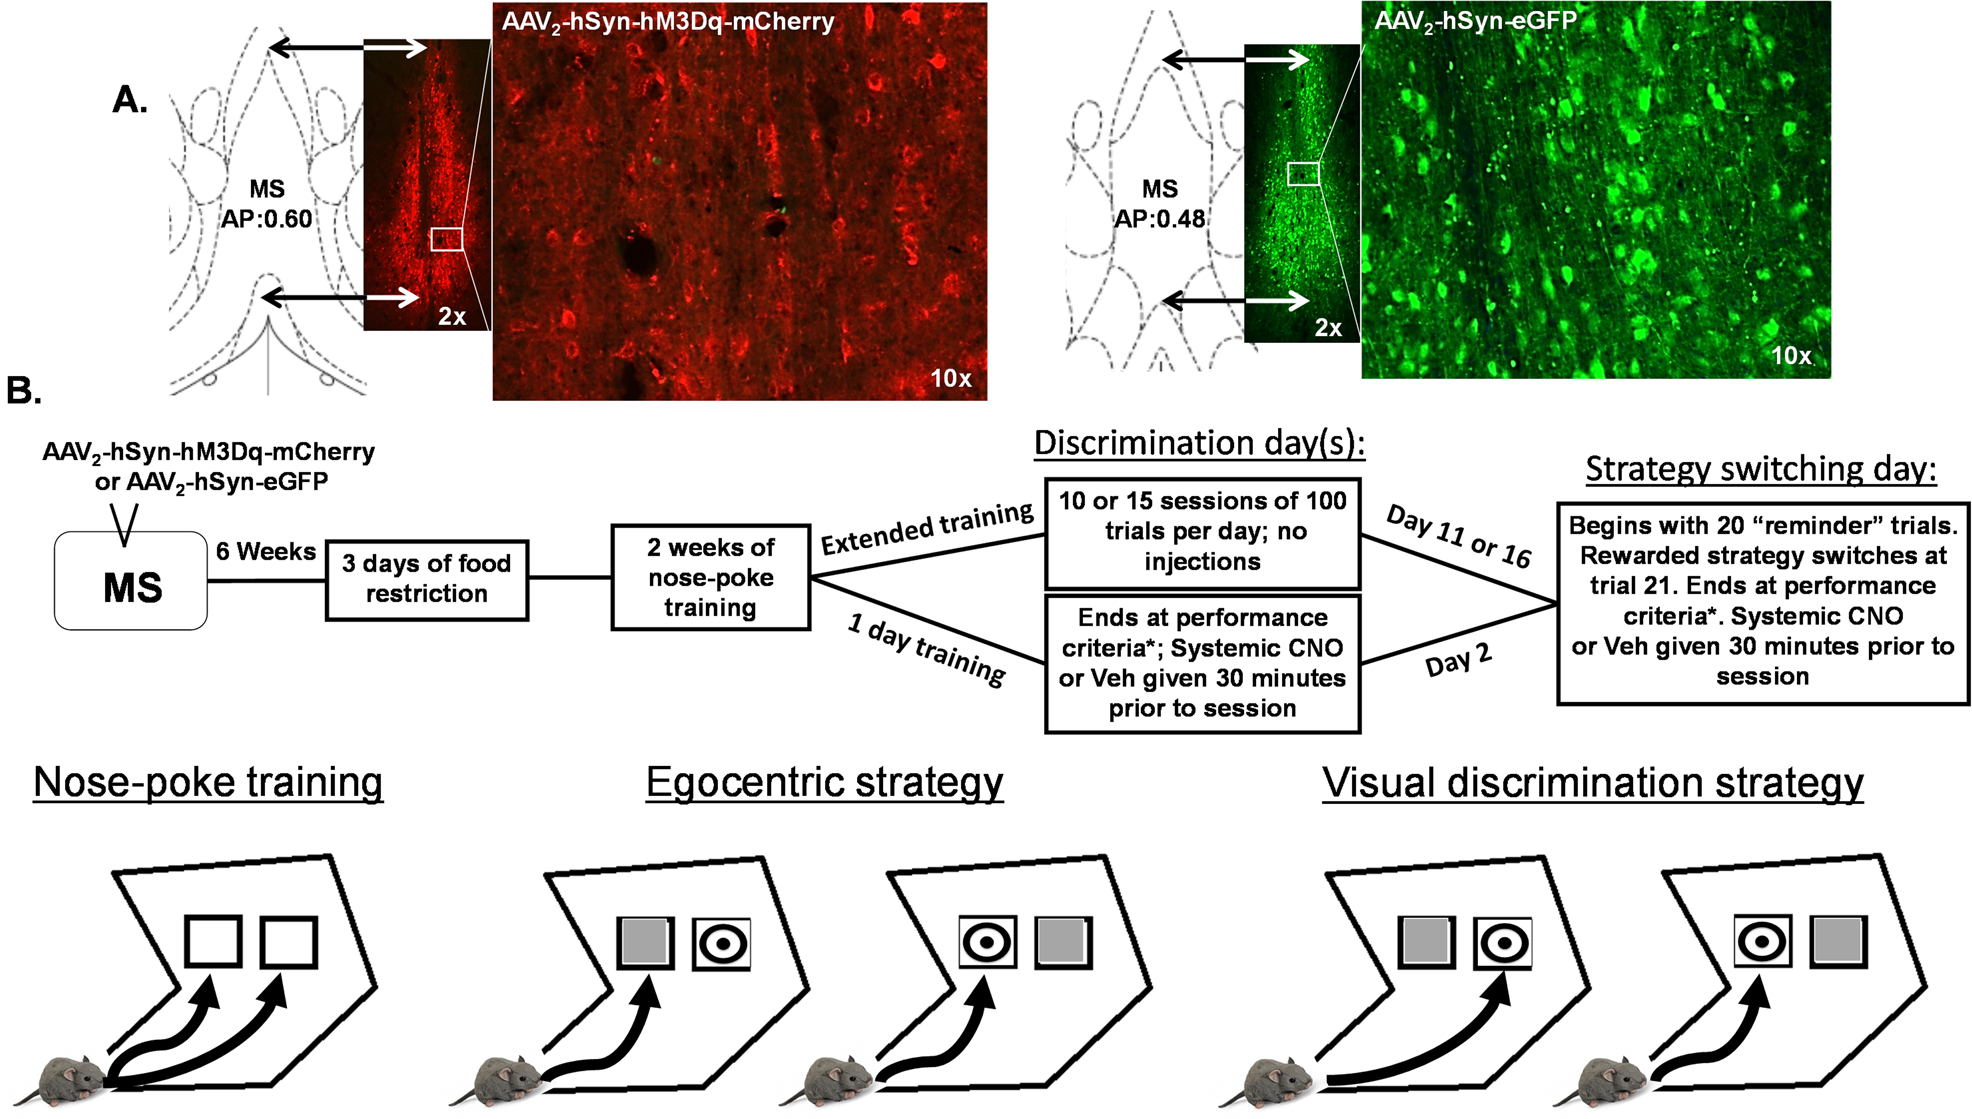 Medial septum activation improves strategy switching once strategies are  well-learned via bidirectional regulation of dopamine neuron population  activity | Neuropsychopharmacology